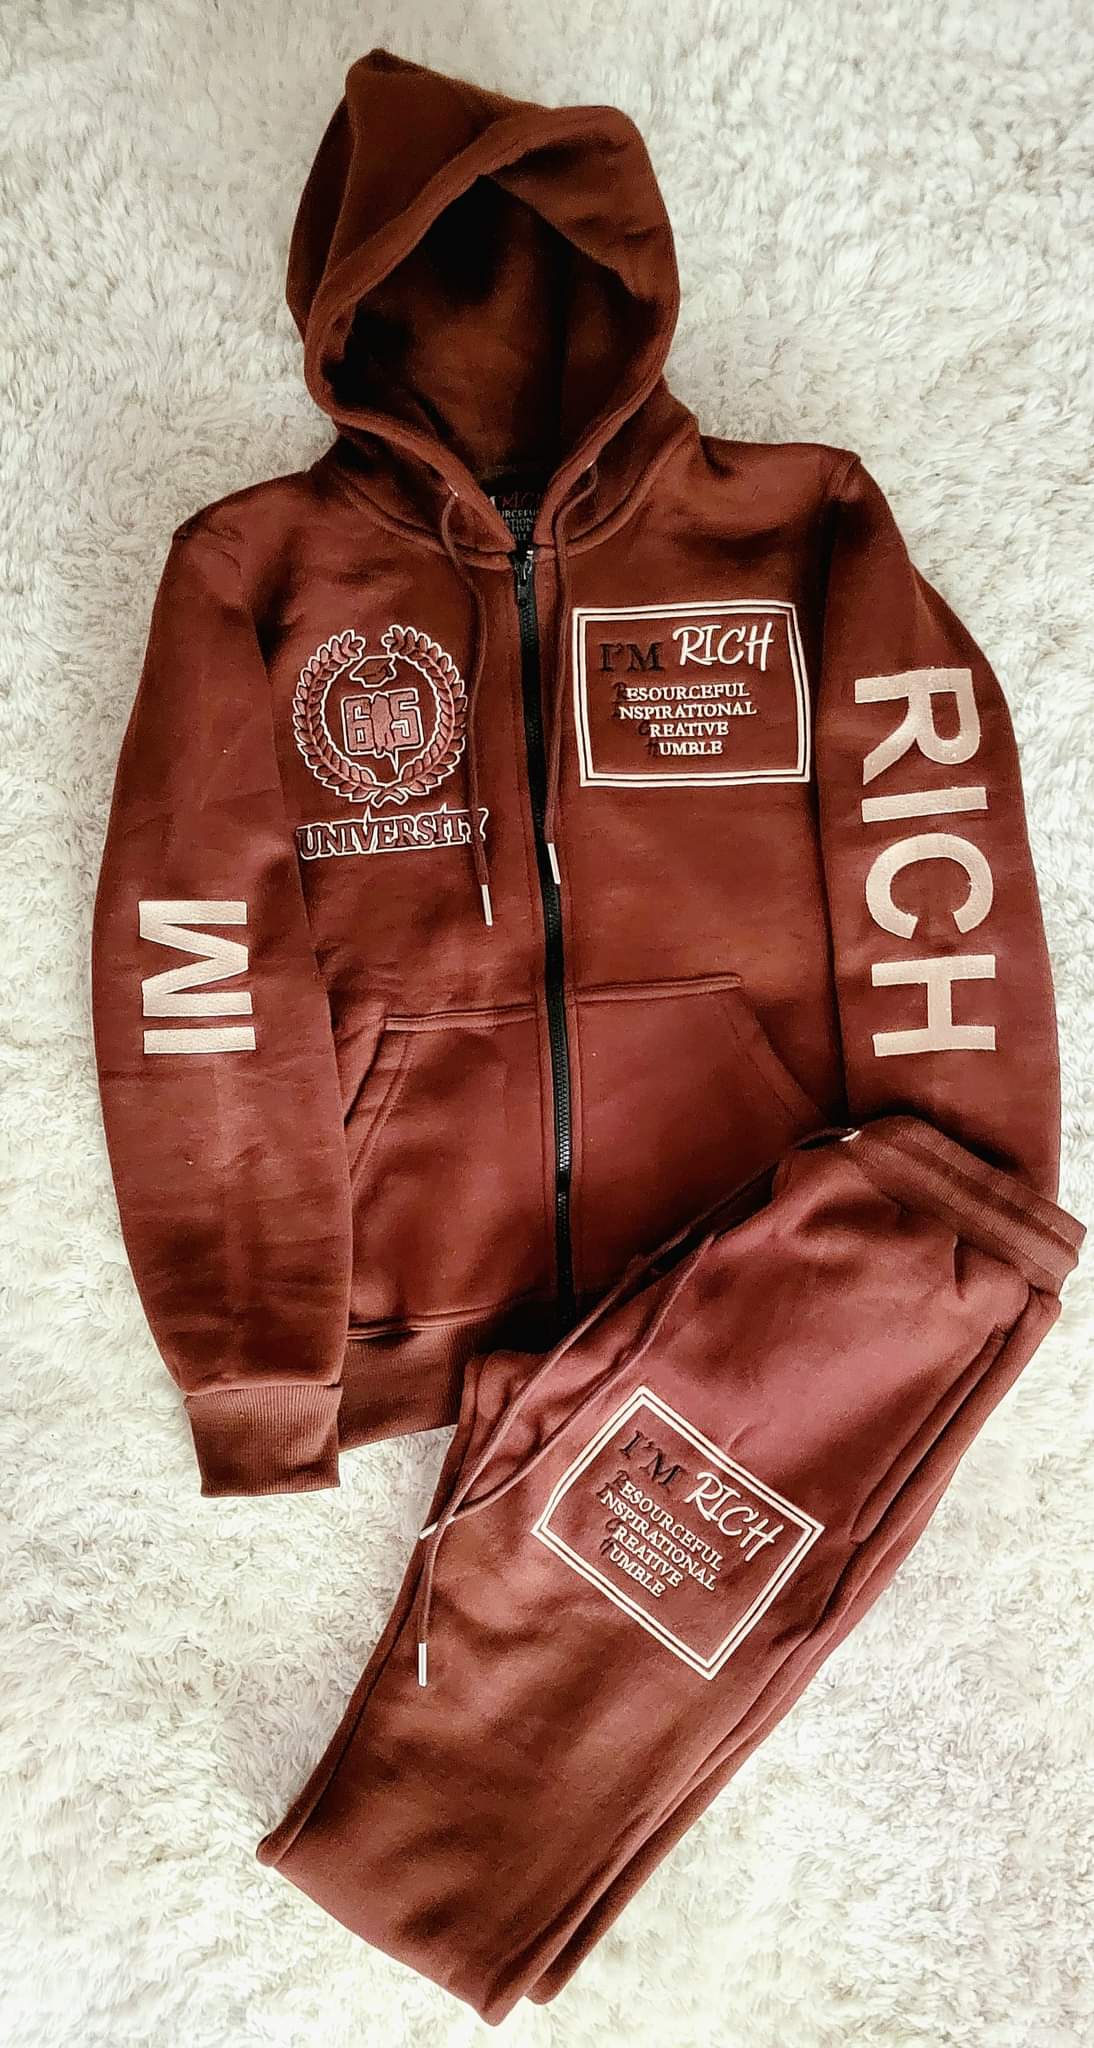 Im Rich LV inspired Jogging Suit